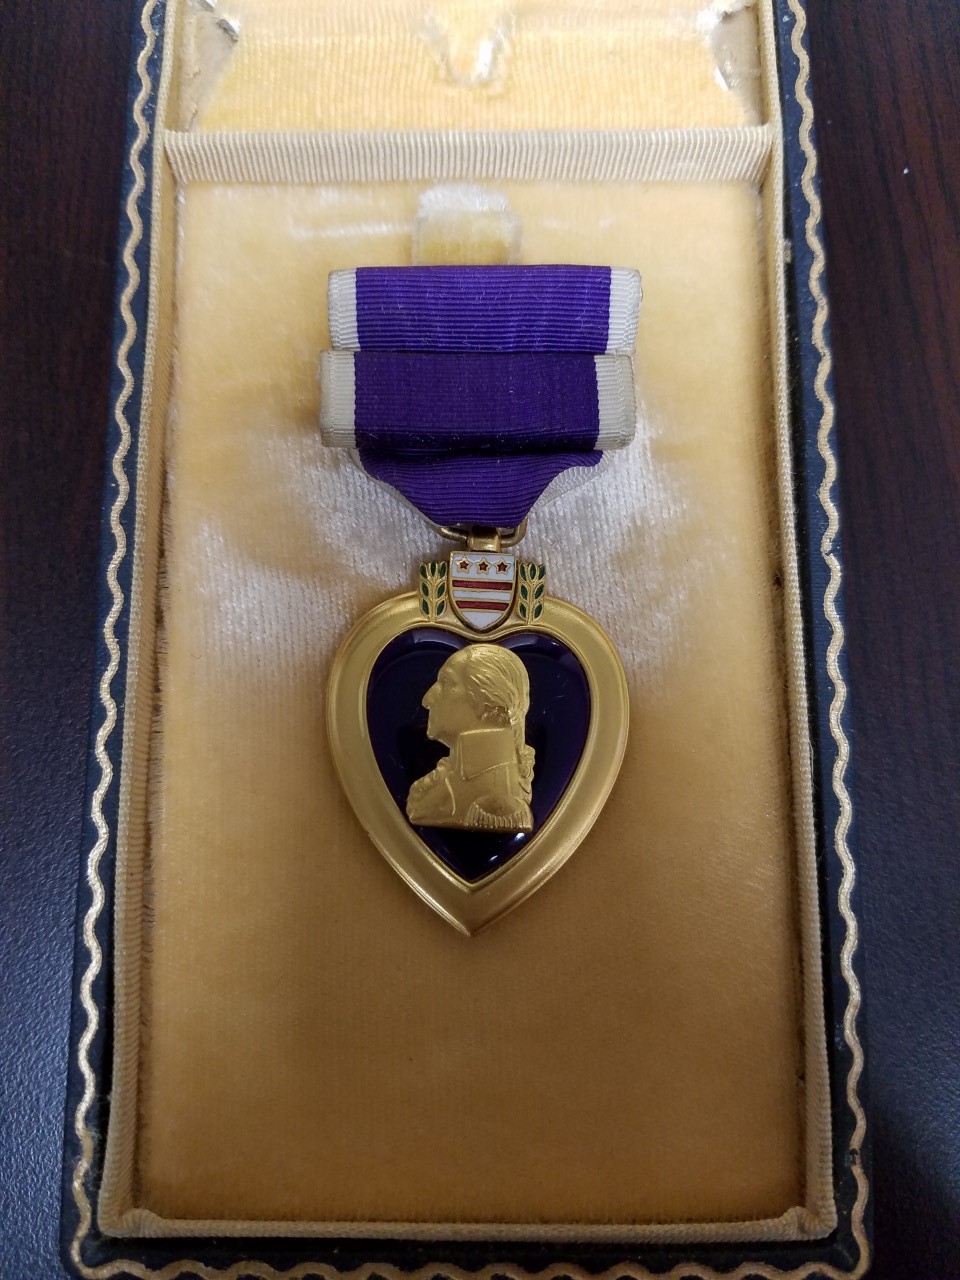 Private Wesley Forsythe's Purple Heart 1944.